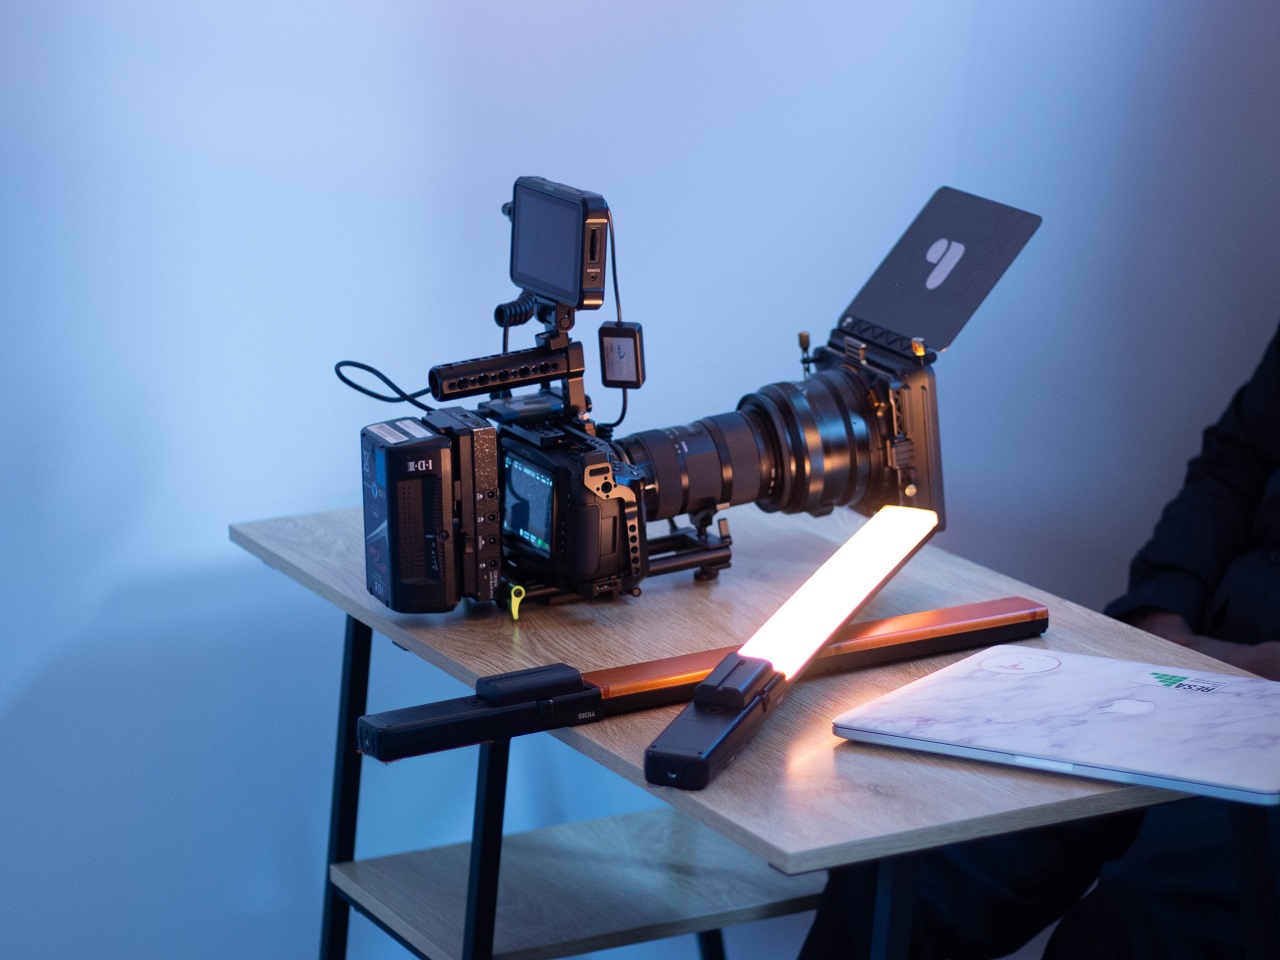 video camera on desk with light. Credit harry truong